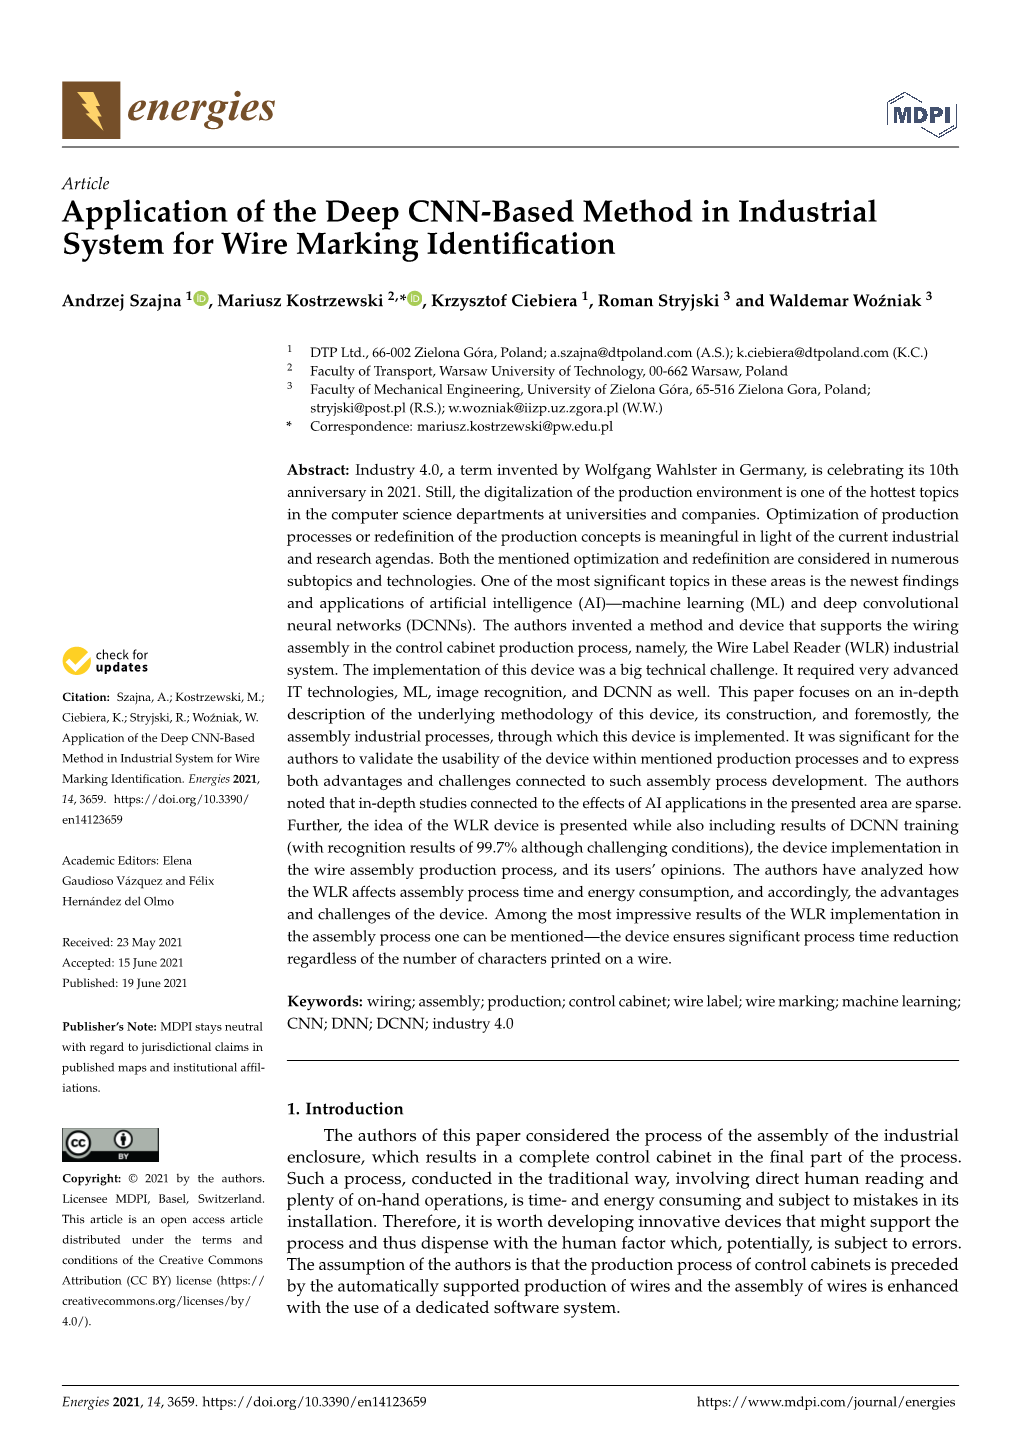 Application of the Deep CNN-Based Method in Industrial System for Wire Marking Identification